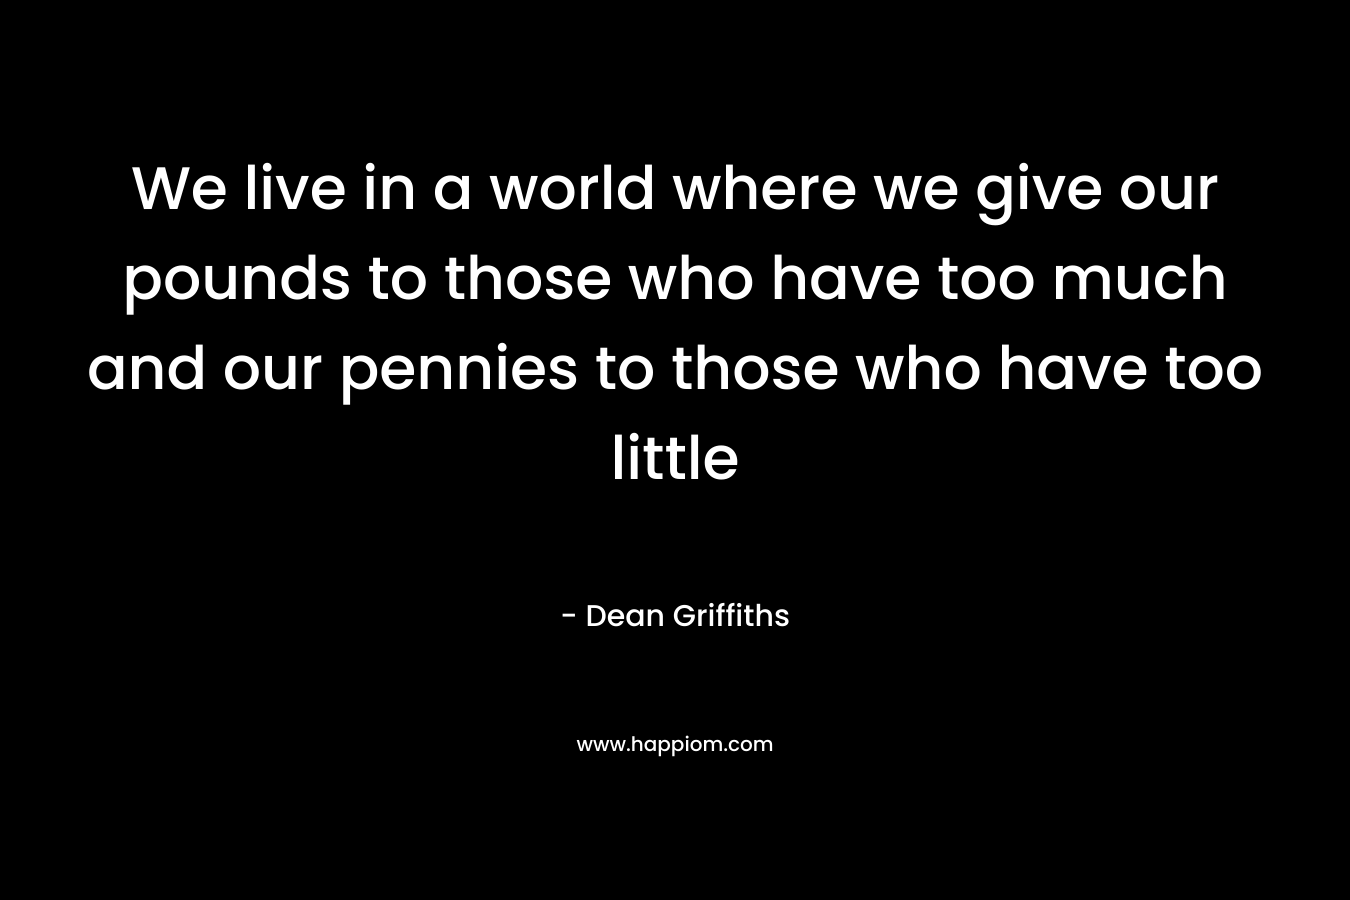 We live in a world where we give our pounds to those who have too much and our pennies to those who have too little – Dean Griffiths